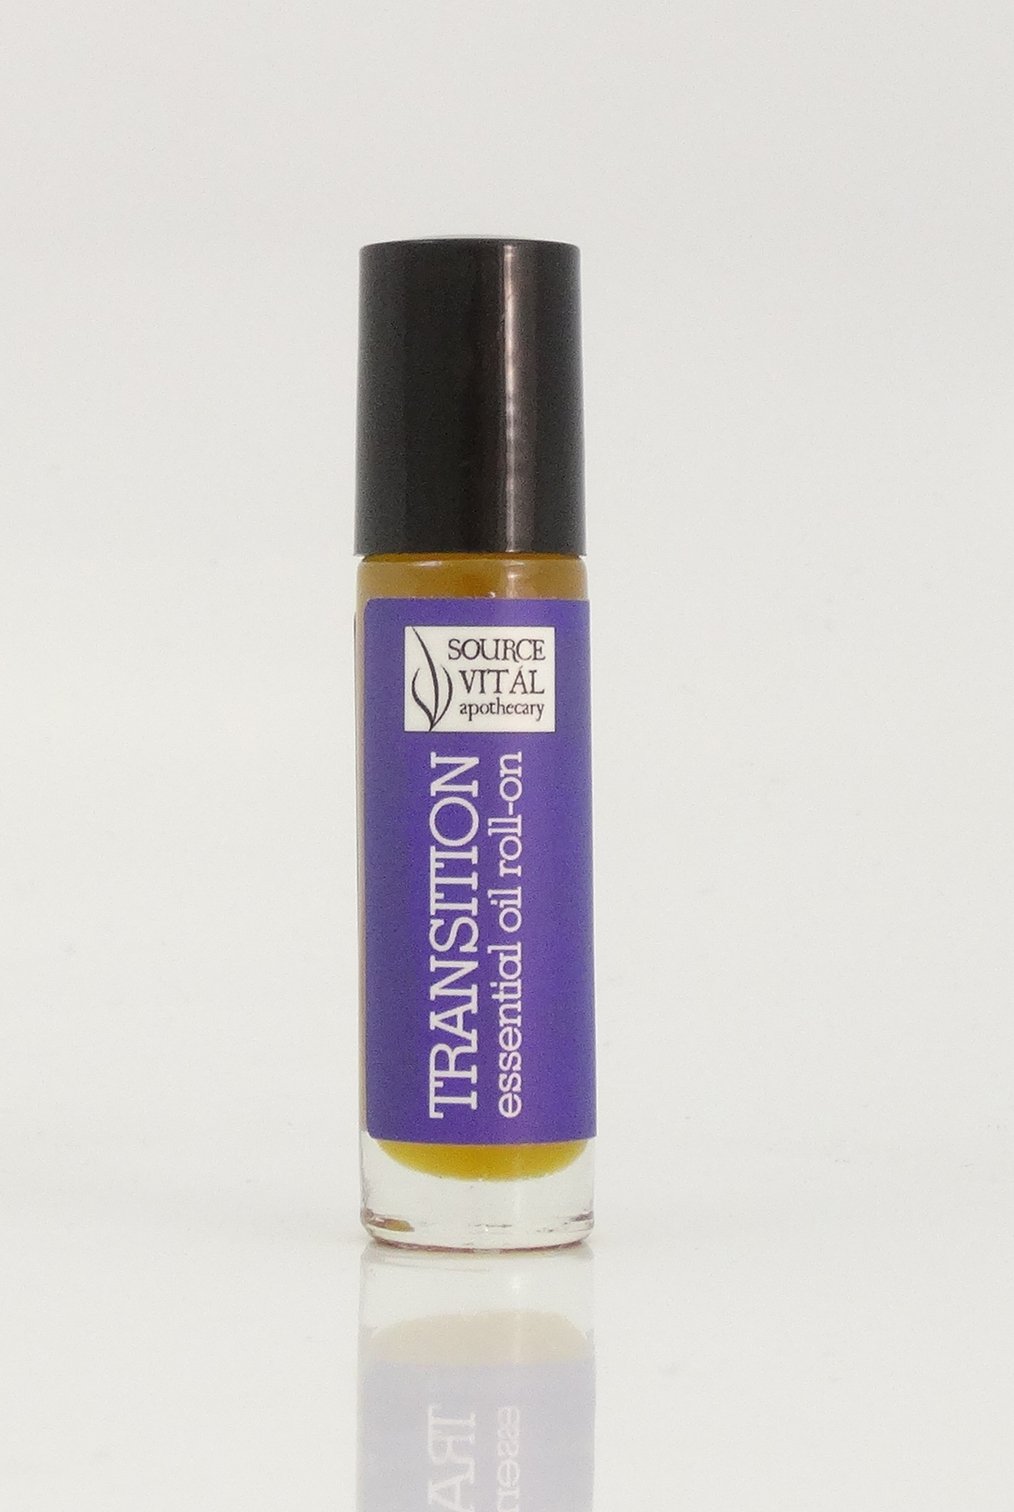 Transition Essential Oil Roll-On - Sanctuary Spa Houston